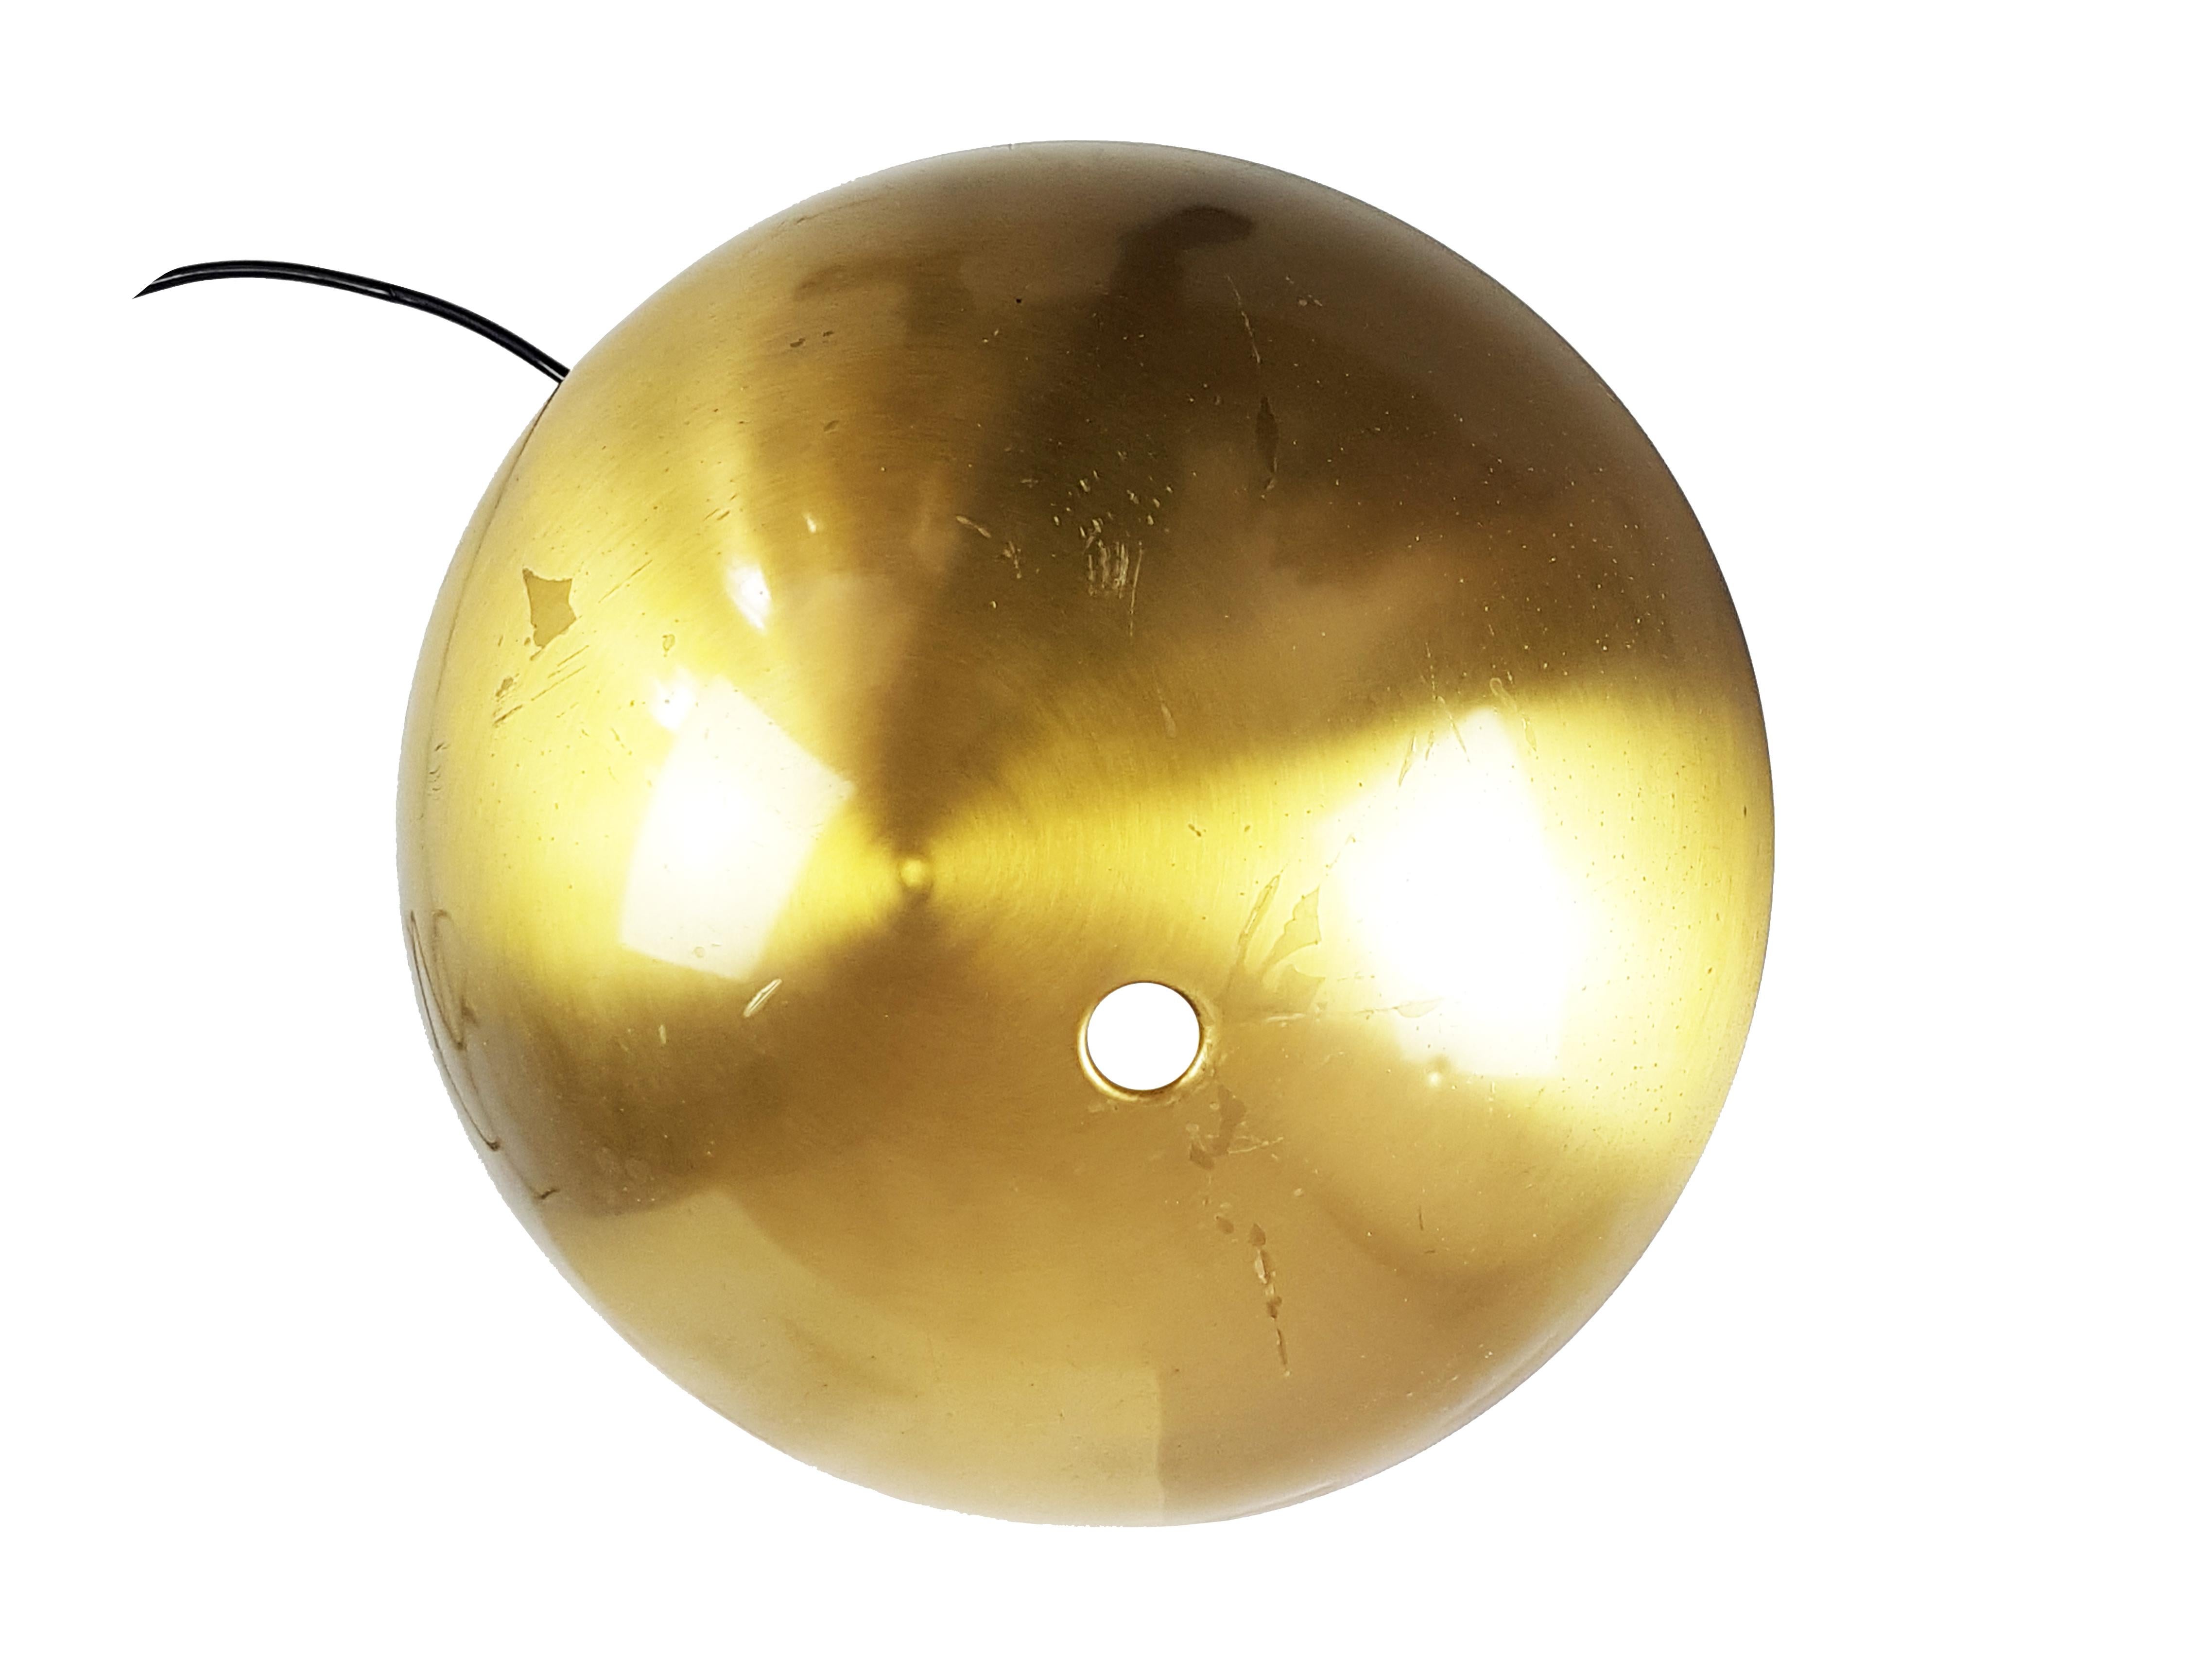 Brushed Brass Vaga Table Lamp by Franco Mirenzi for Valenti, 1978 For Sale 2